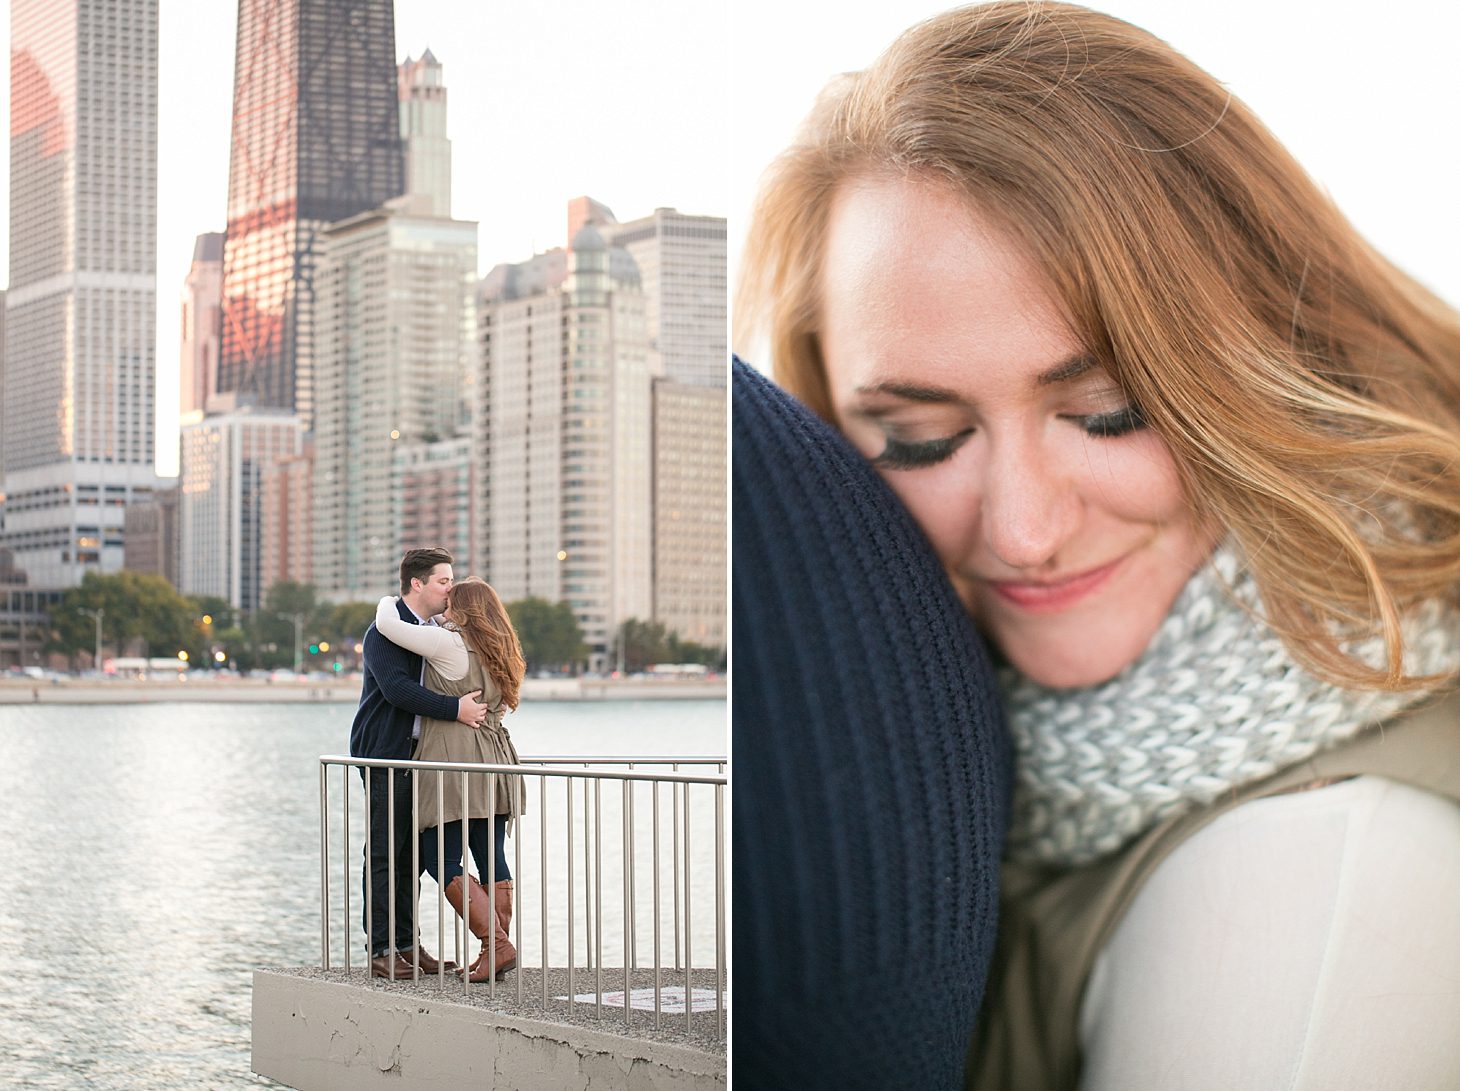 olive-park-engagement-photos-by-christy-tyler-photography_0025